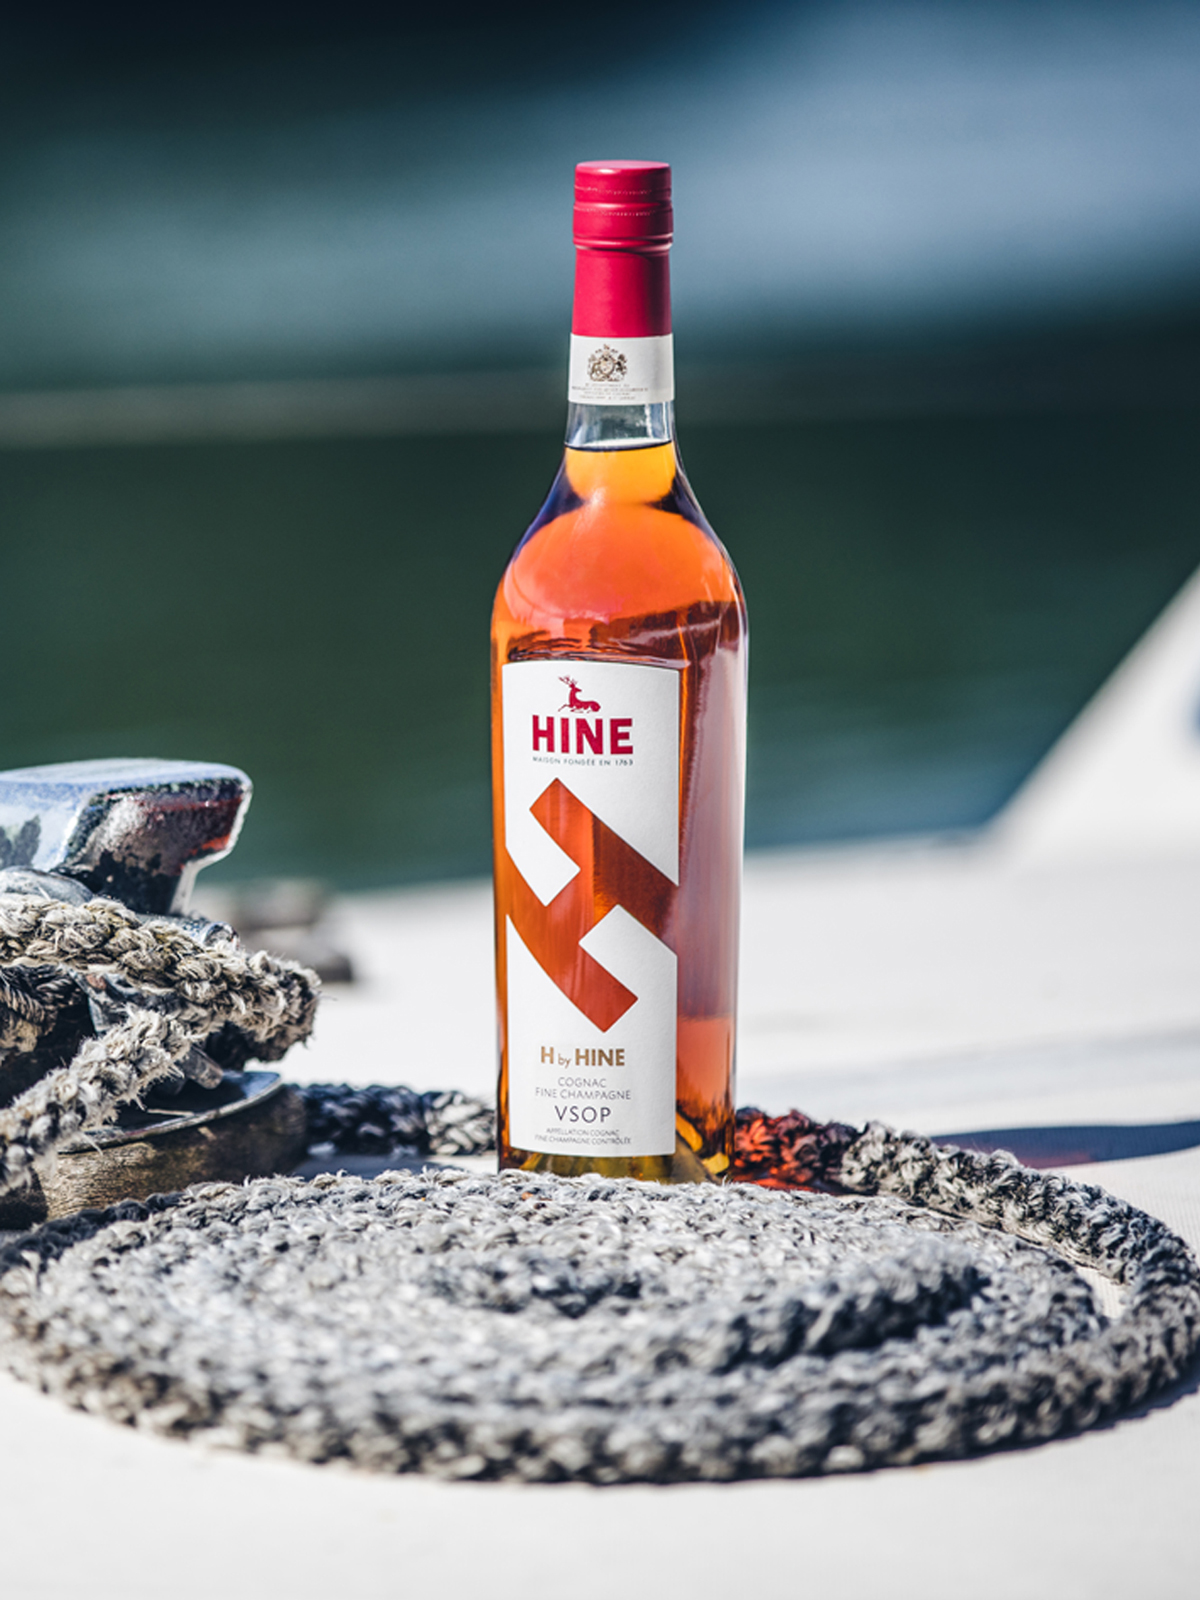 HINE H by HINE